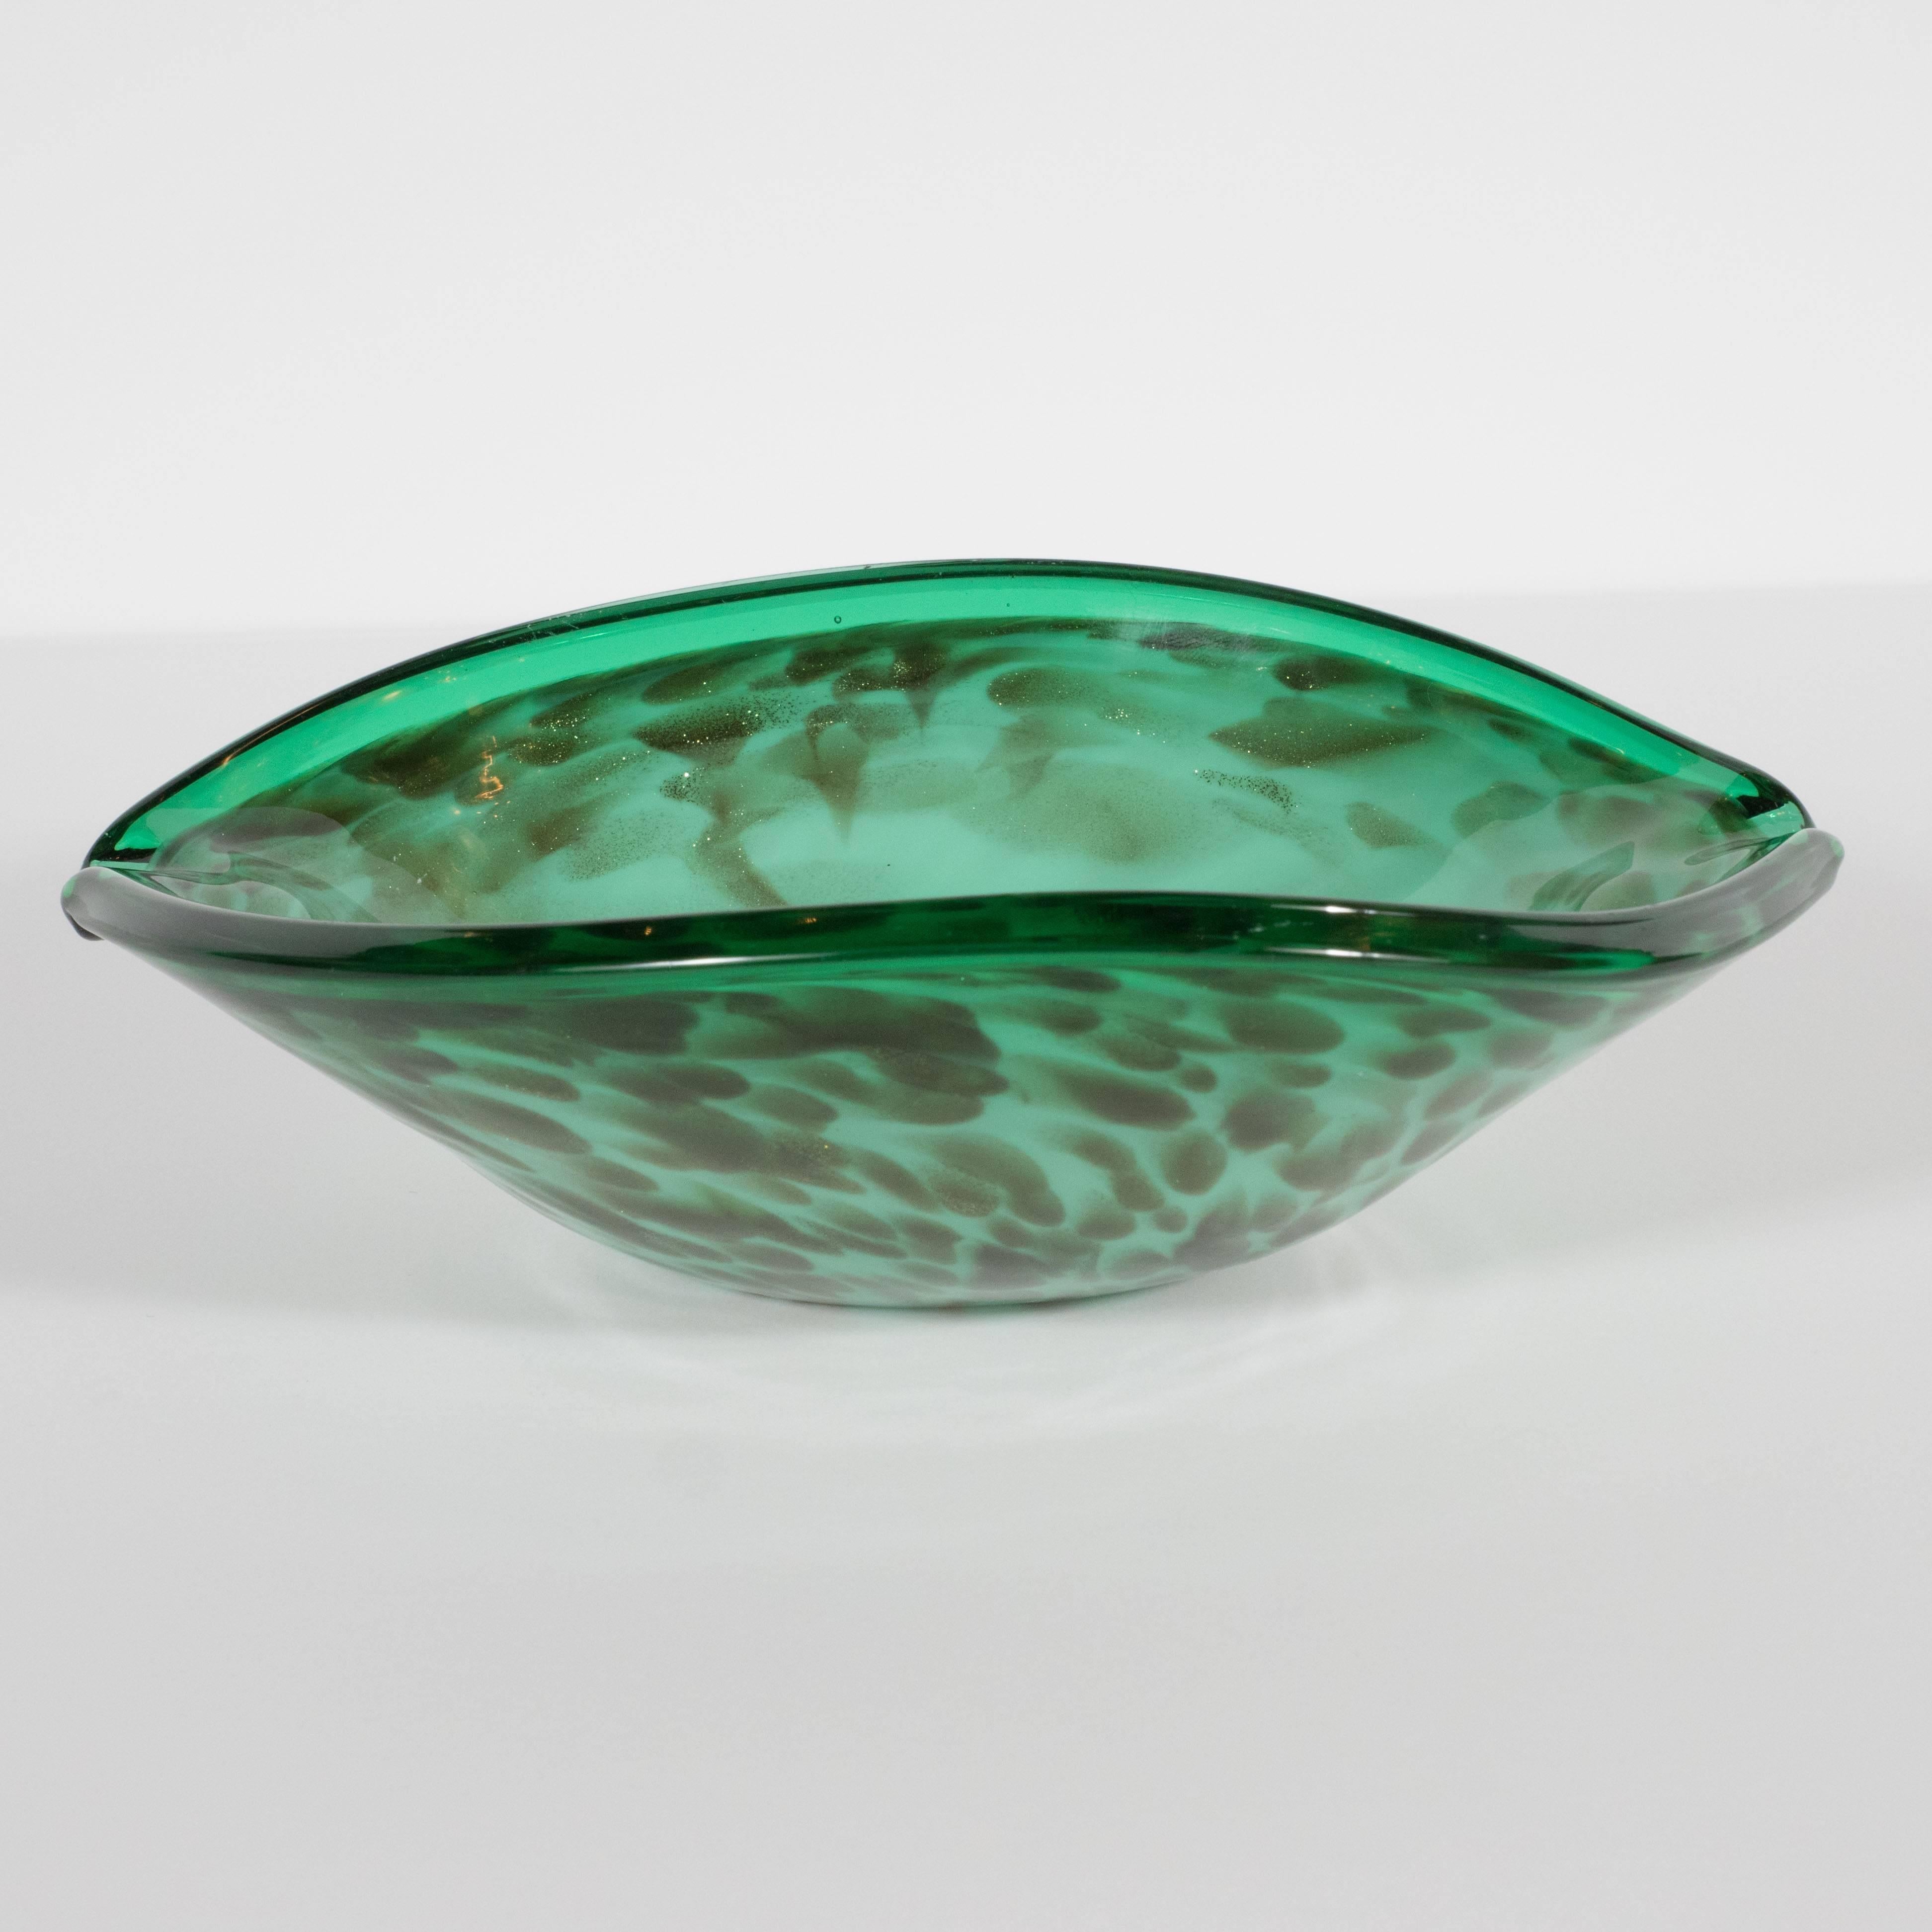 This stunning Mid-Century Modern glass bowl was handblown on the fabled Venetian island of Murano a locale internationally renowned for its superlative artisanal glass for centuries, circa 1950. The body of the piece, resembling the shape of an